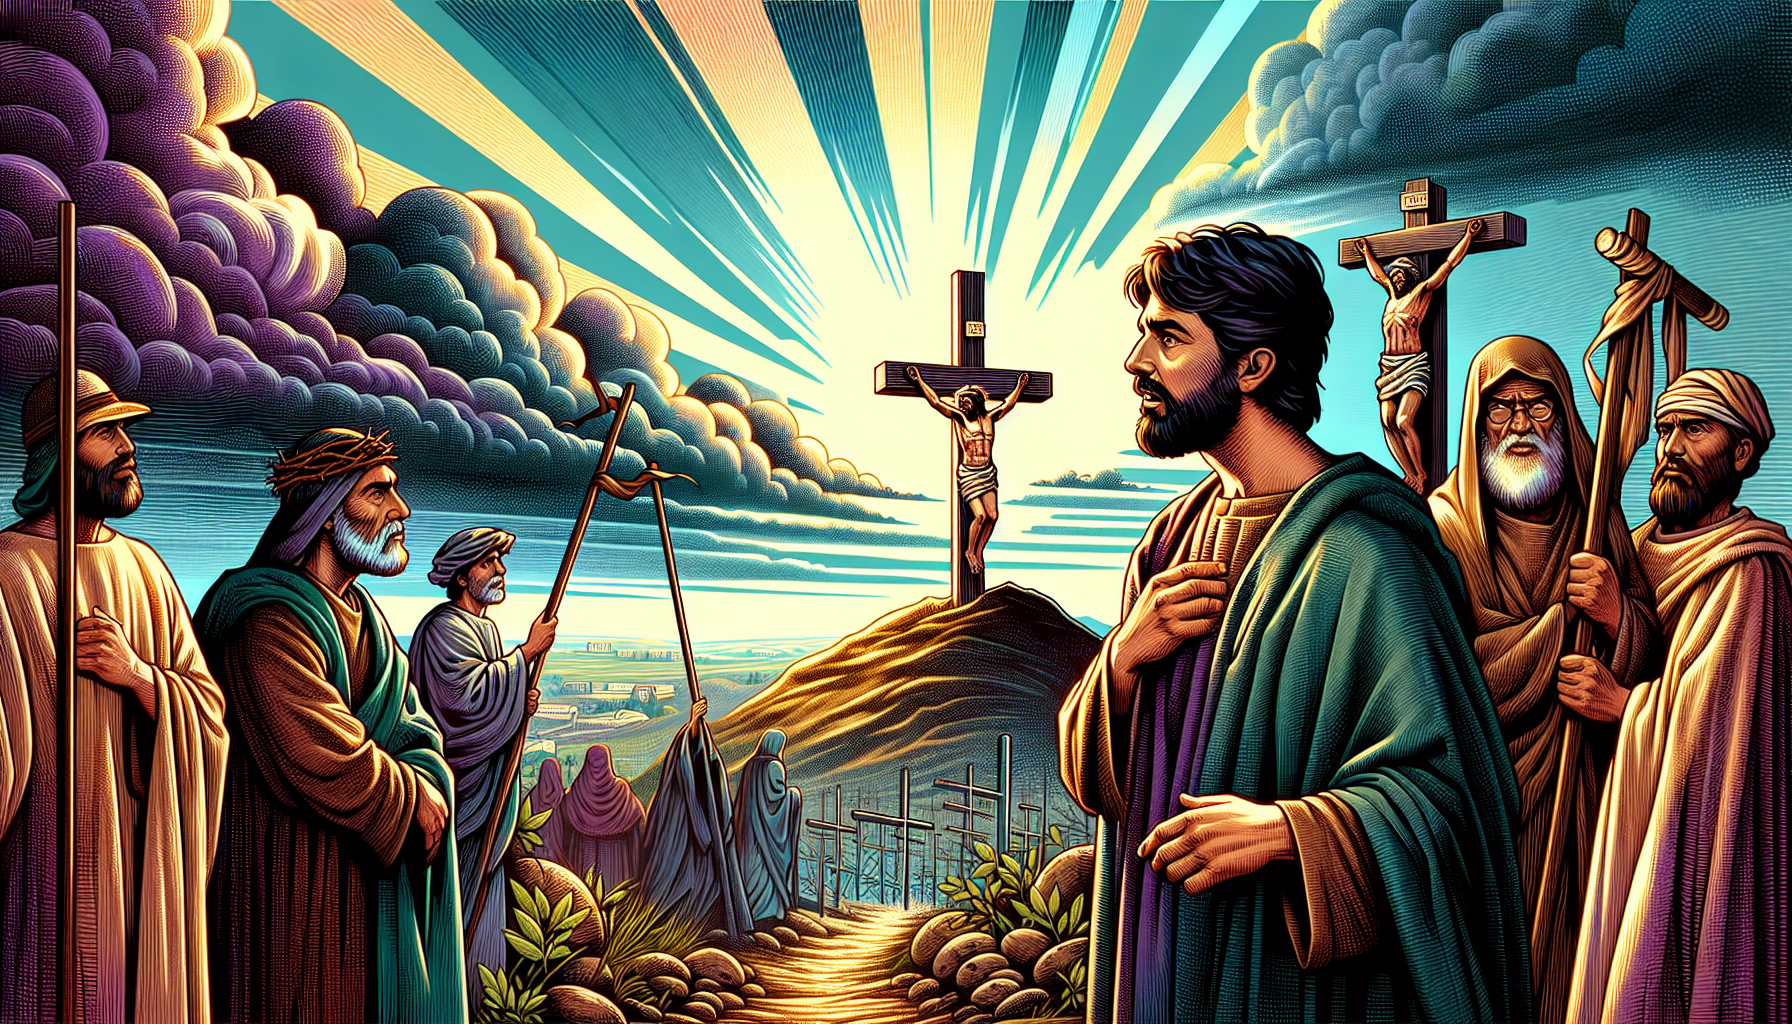 Create an illustration depicting the biblical scene of the crucifixion, focusing on the repentant thief. The image should show three crosses on a hill, with Jesus in the center and the repentant thief